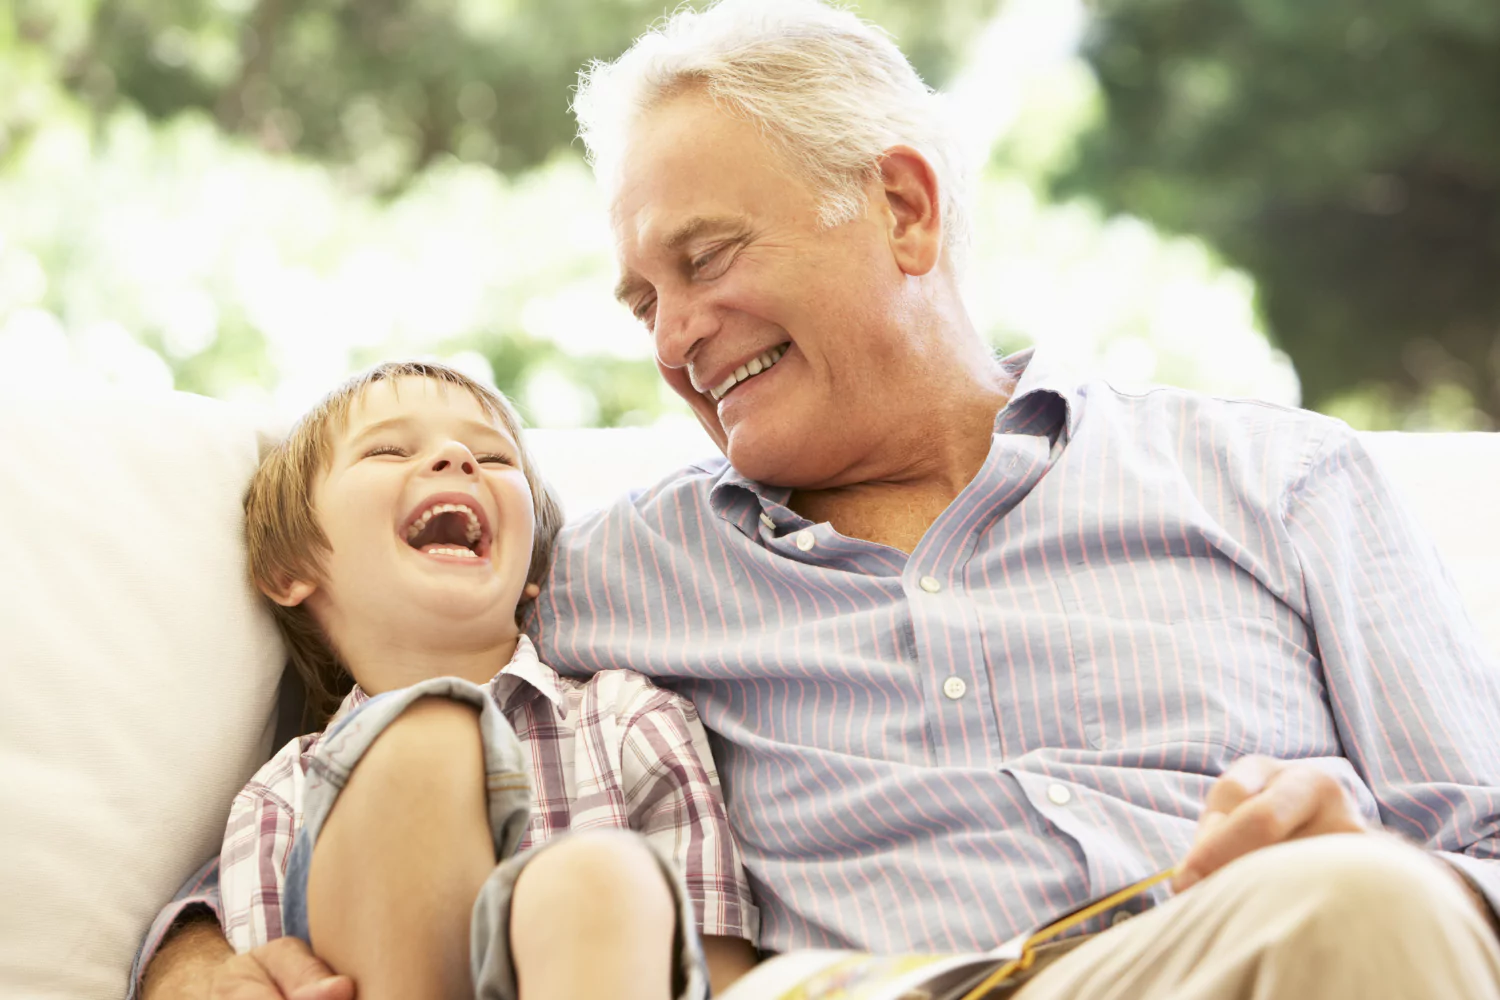 Grandparents: What parents really want from you – SheKnows